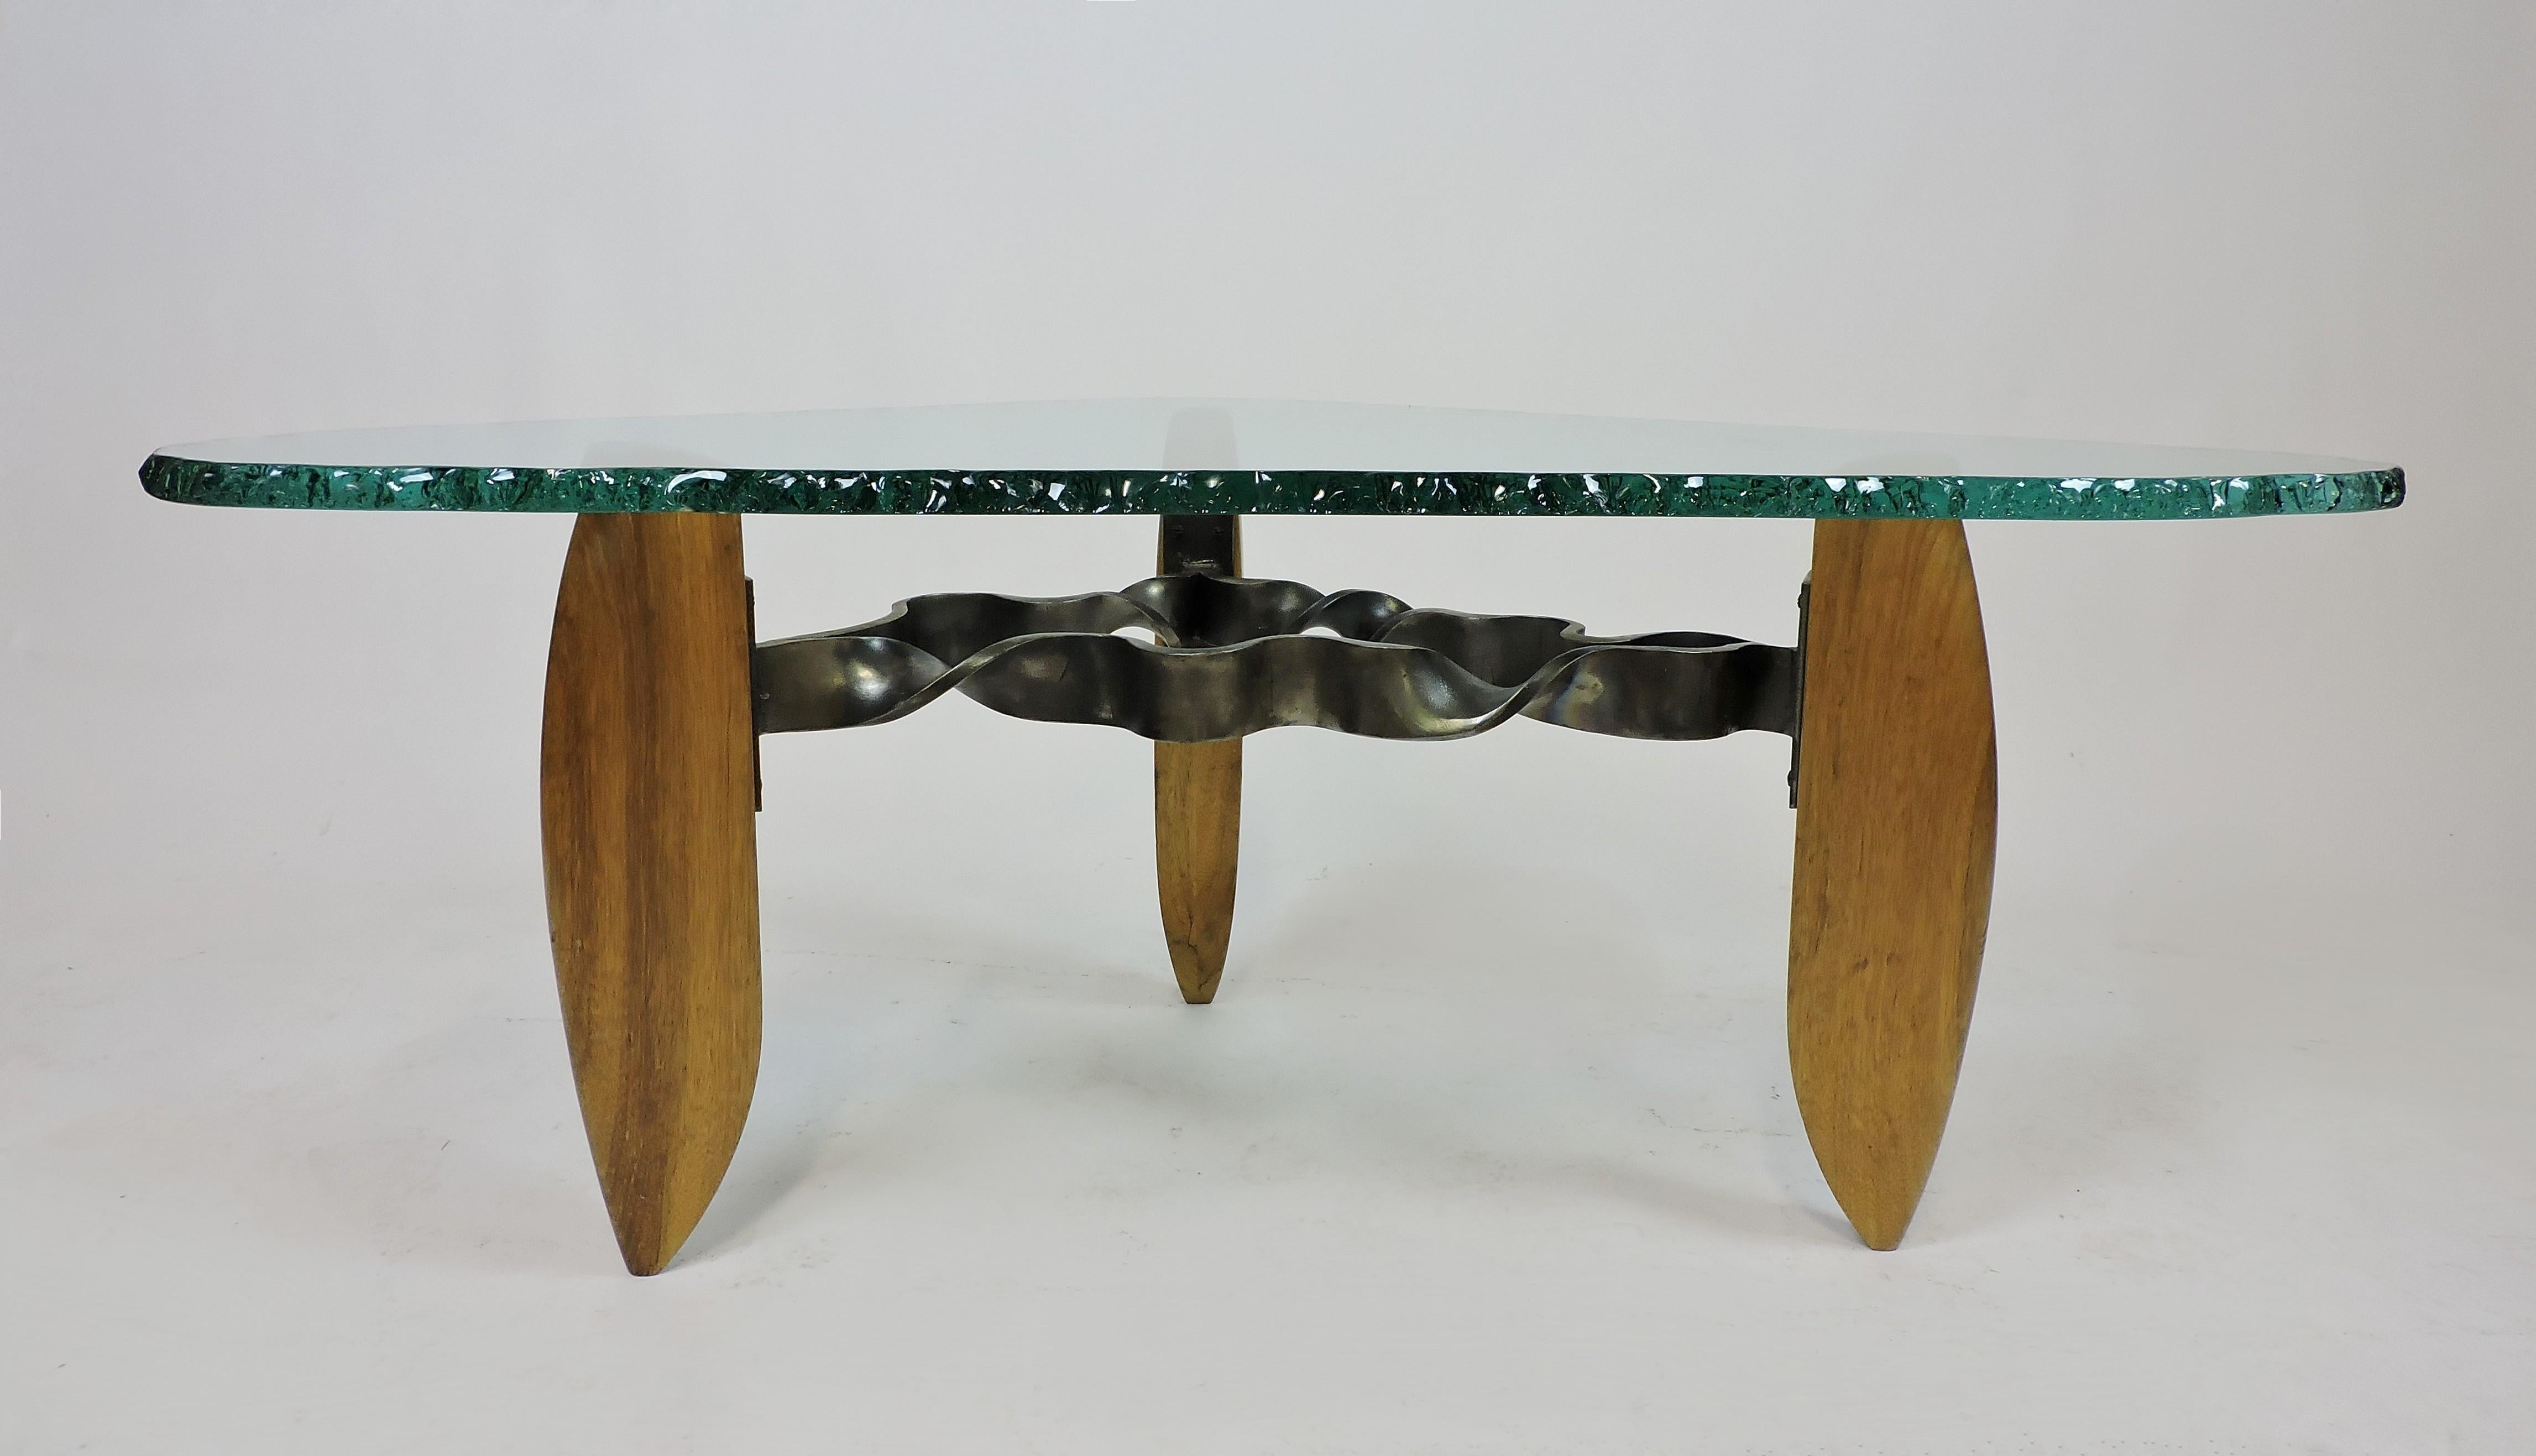 Late 20th Century American Studio Silas Seandel Style Modernist Metal, Wood and Glass Coffee Table For Sale